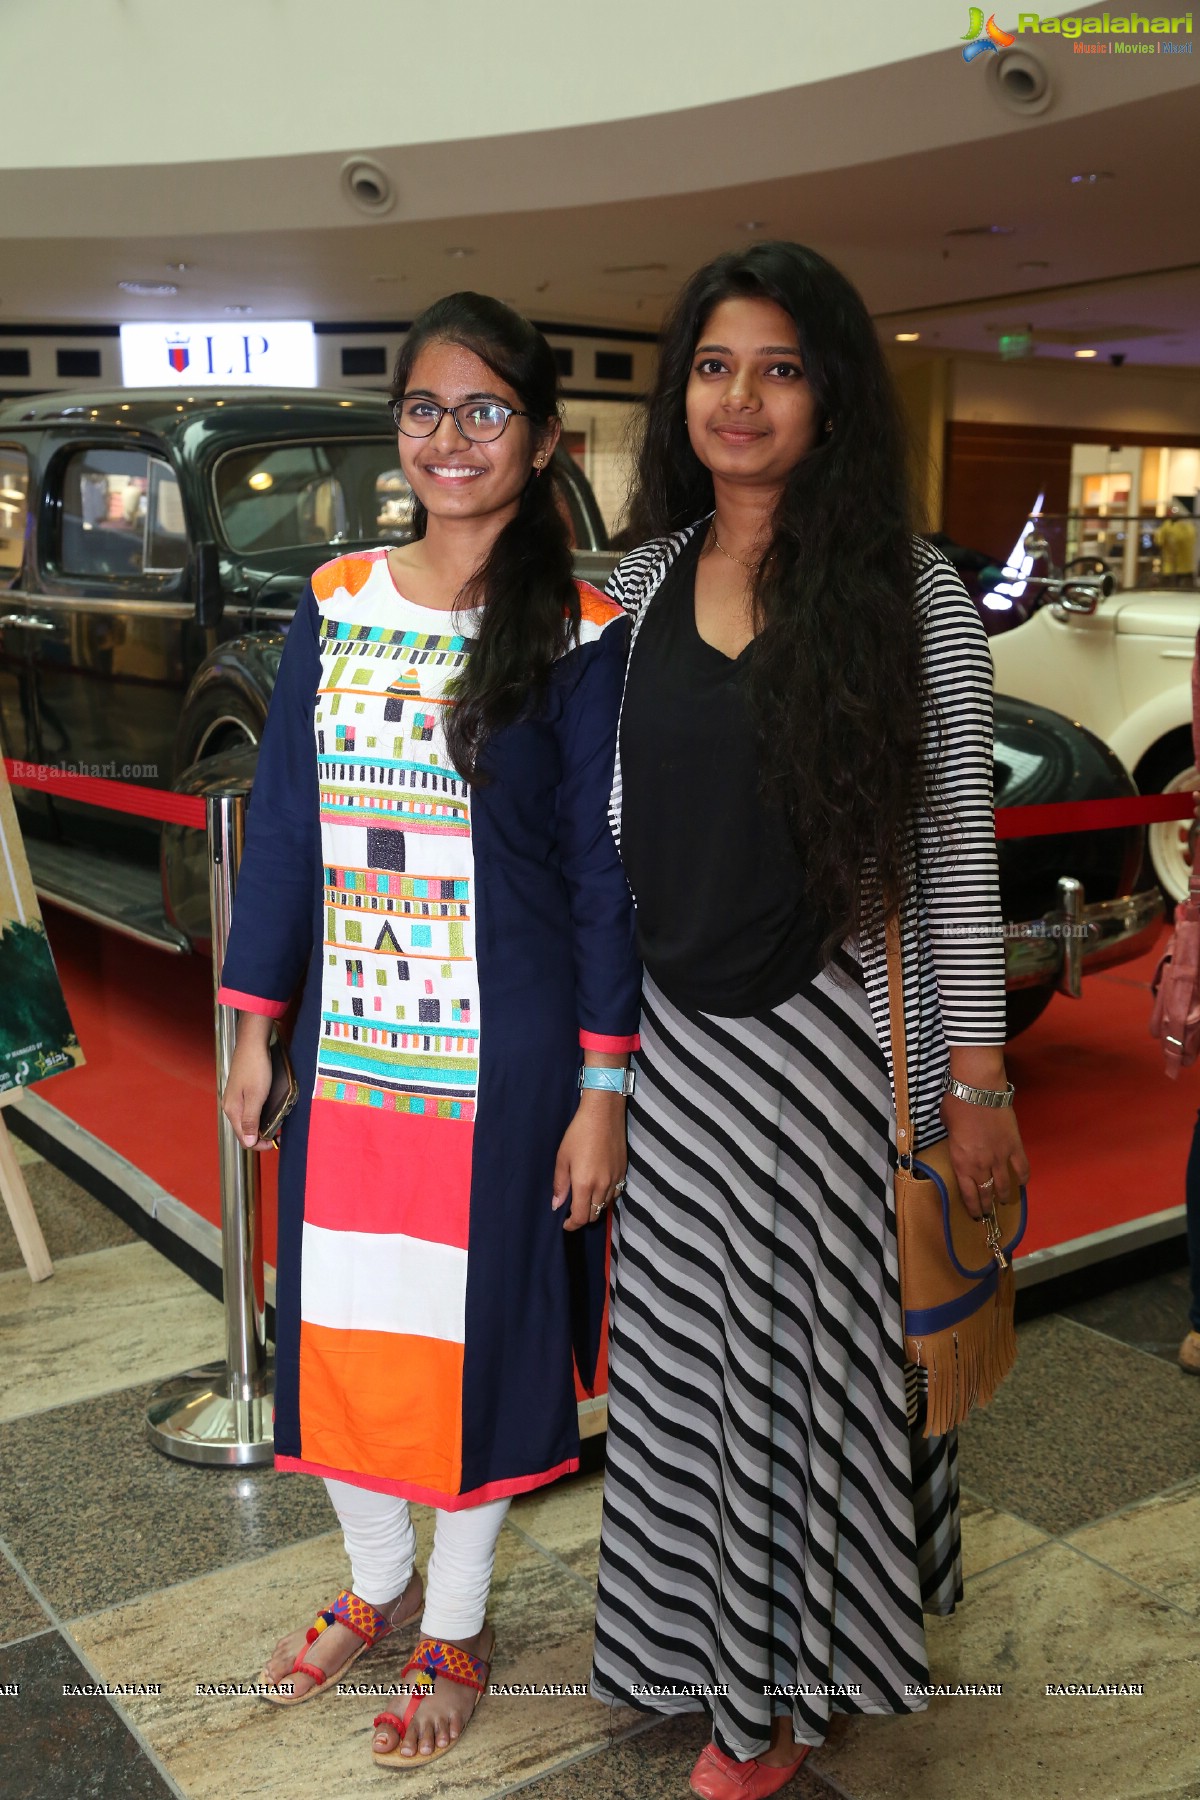 Exclusive Vintage and Classic Car Show at The Forum Sujana Mall